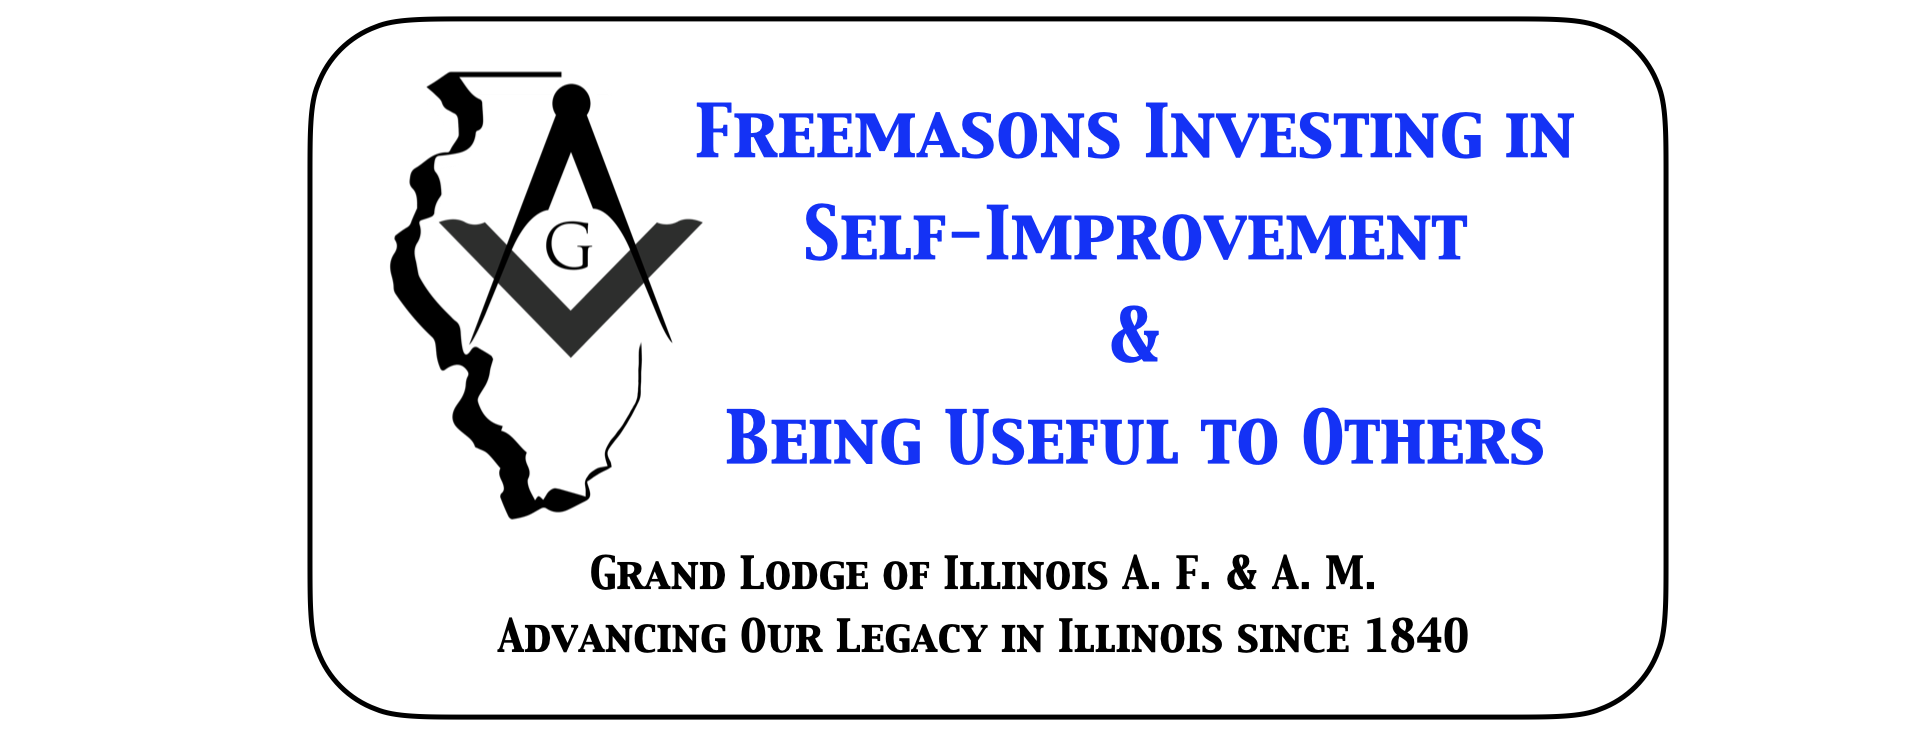 The Grand Lodge of Illinois is committed to the Freemasons of Illinois and their communities, which is why they have one of the largest charity outreach programs in the nation.